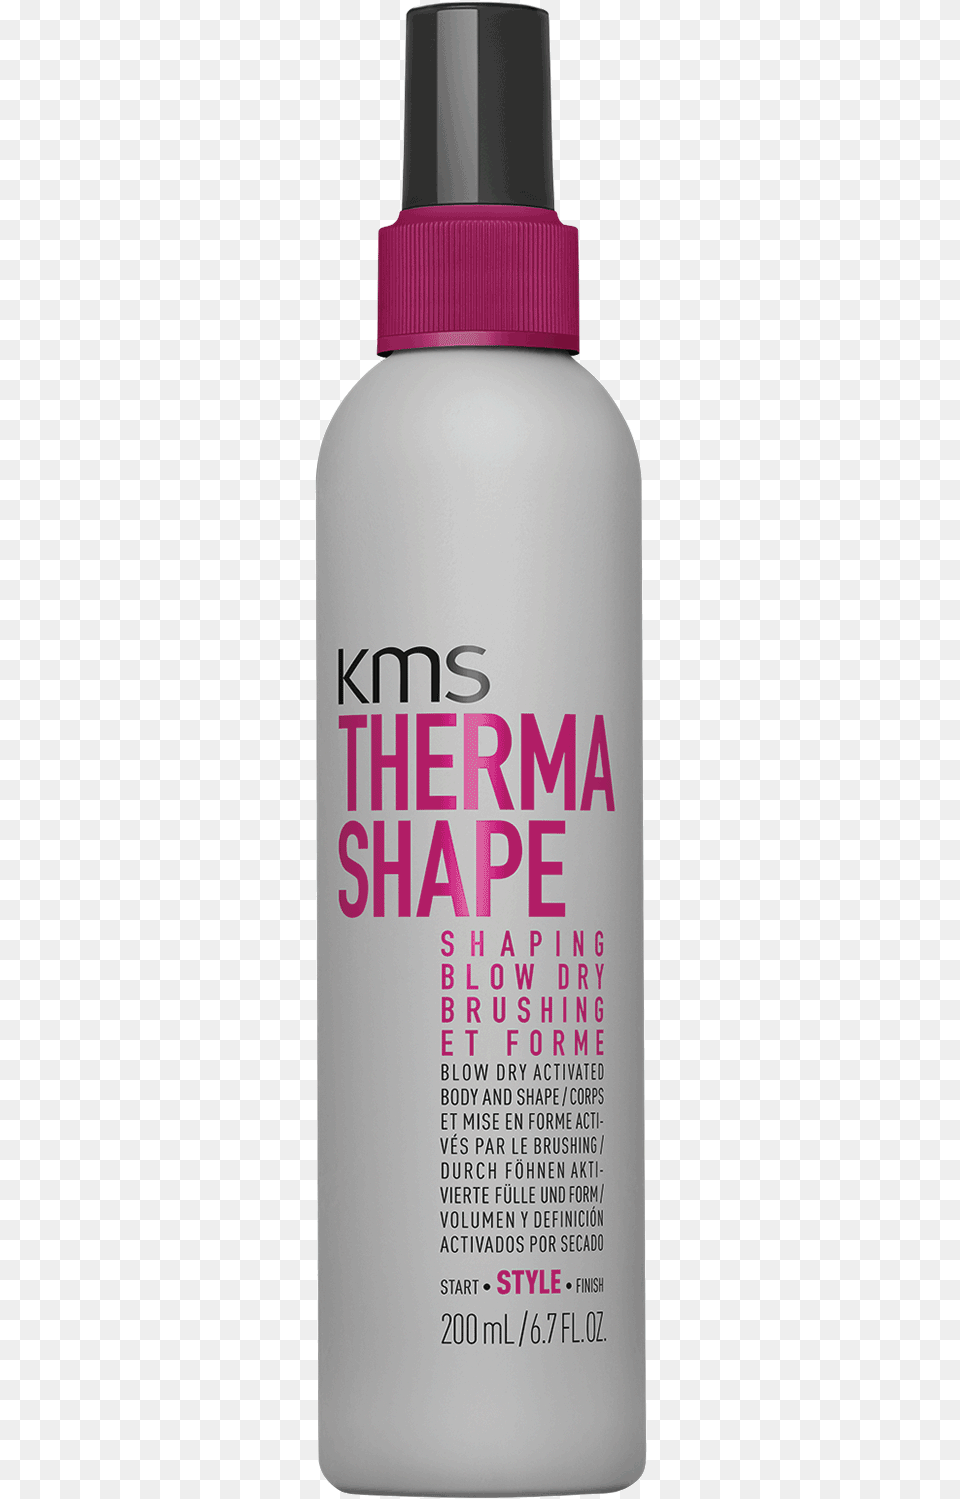 Thermashape Shaping Blow Dry Kms, Bottle, Cosmetics, Shaker Png